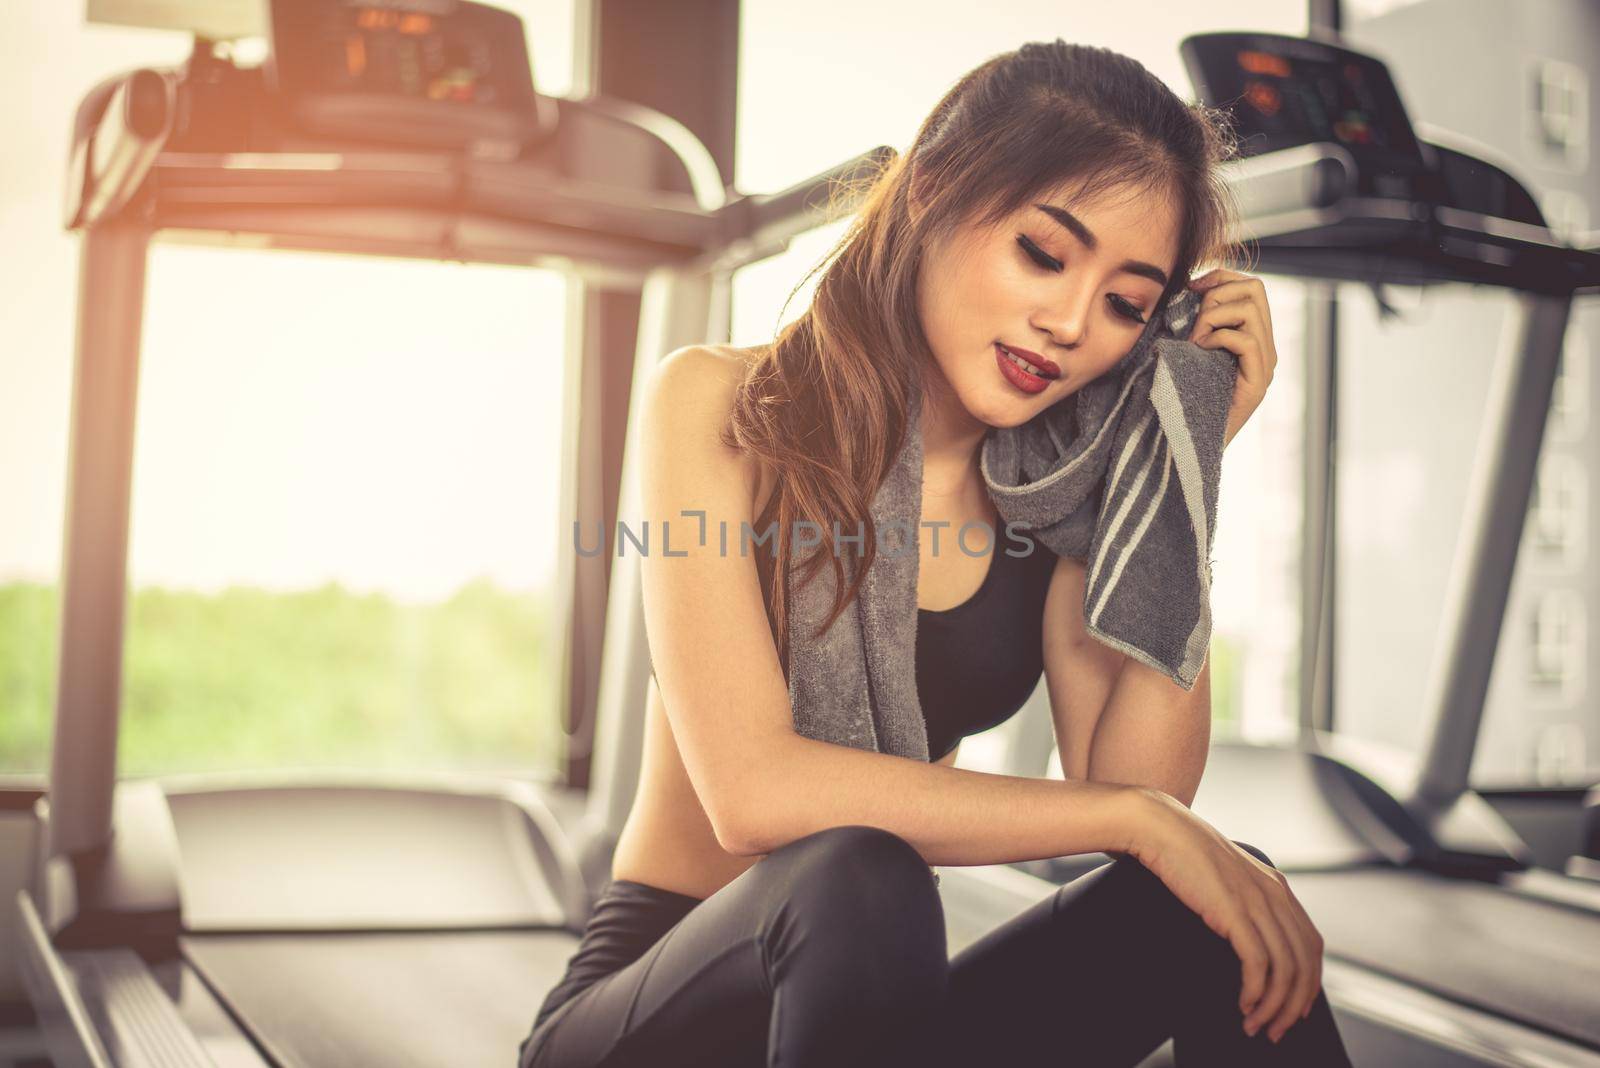 Woman sweats by towel during rest in fitness gym with fitness running equipment. Beauty and relax concept. Gym and fitness training theme   by MiniStocker